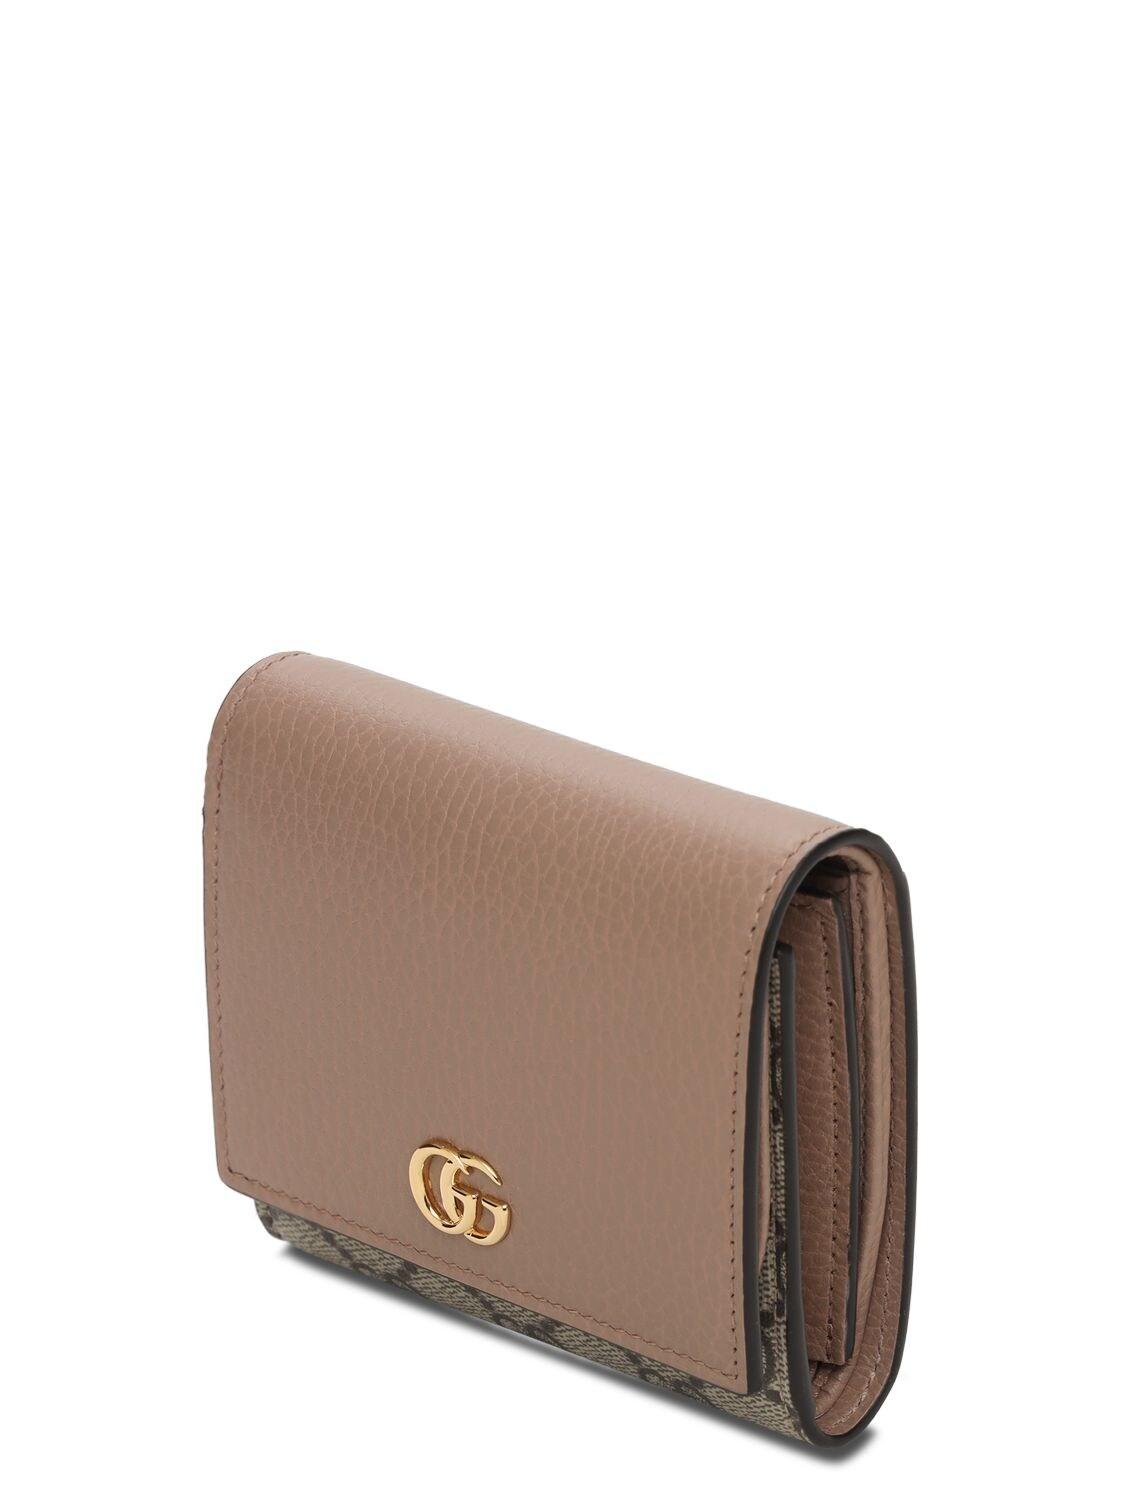 Gucci Petite Marmont Gg Supreme Wallet in Brown | Lyst